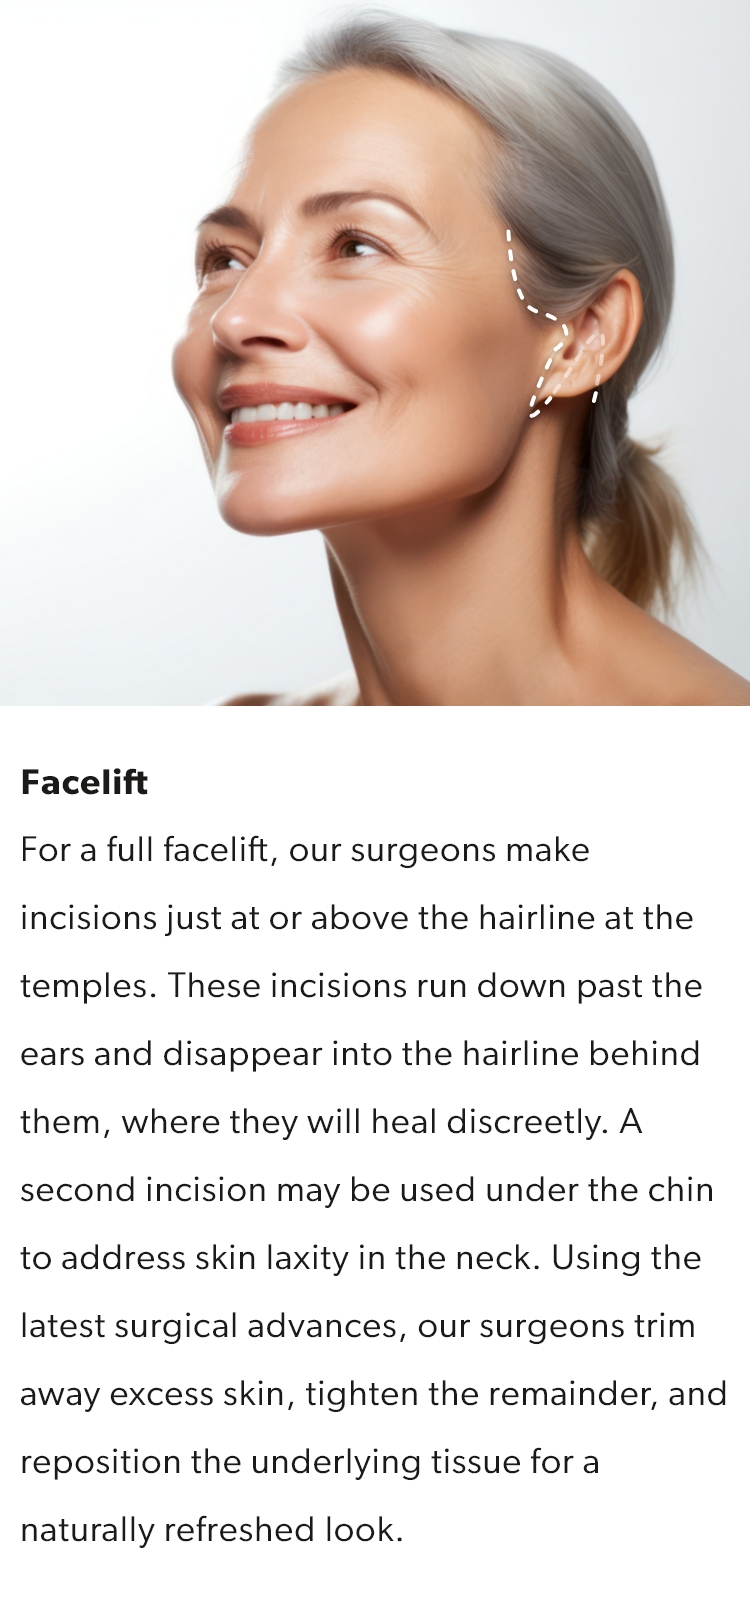 A full facelift will have incisions just at the hairline at the temples